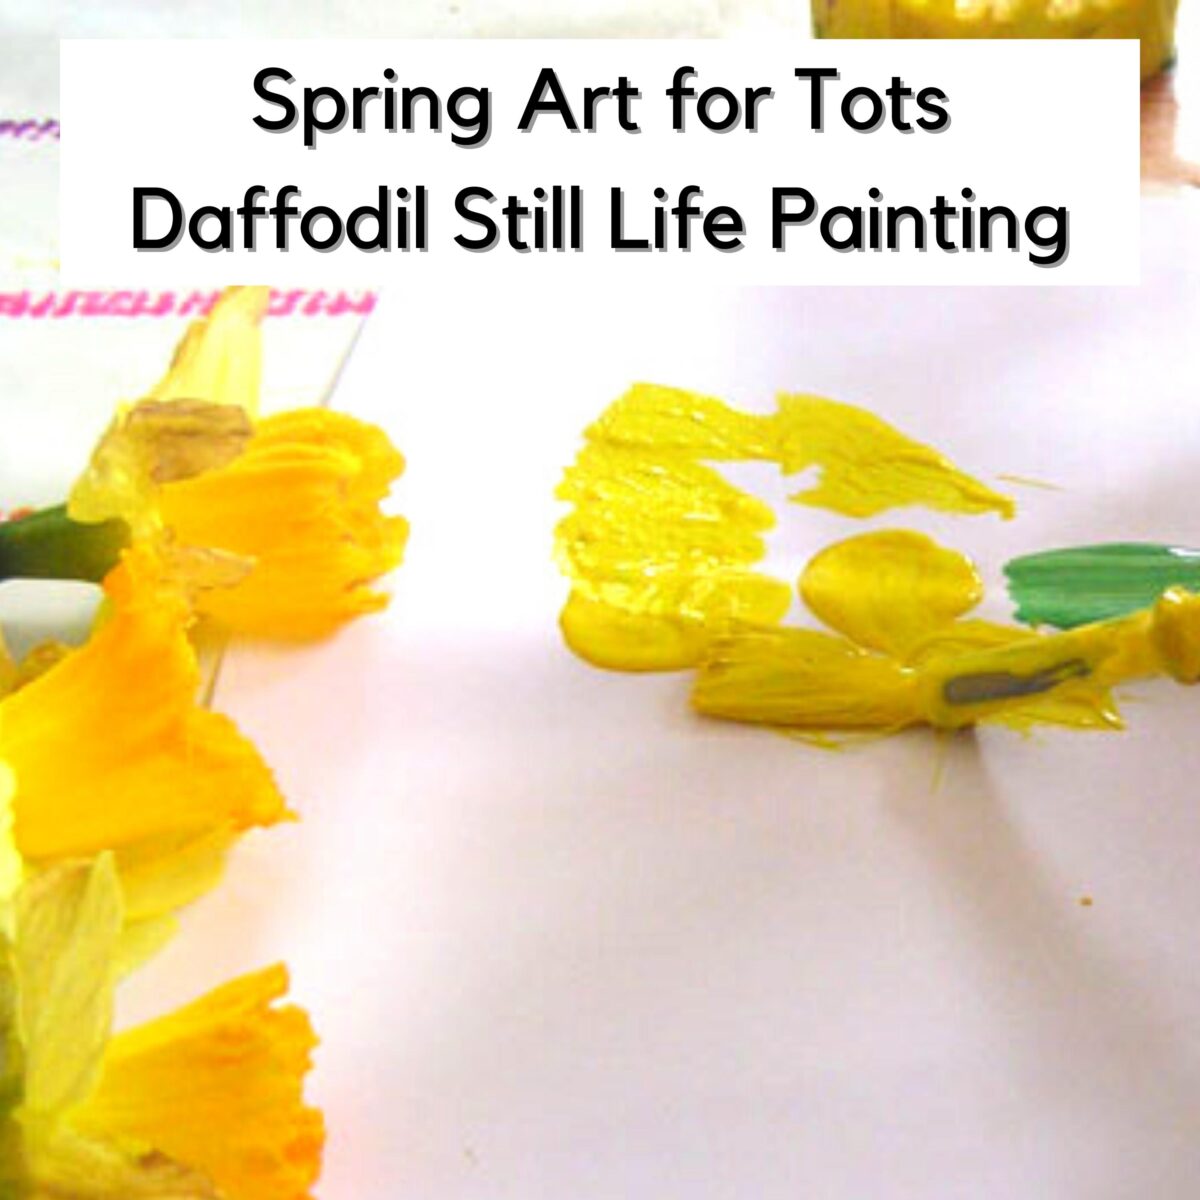 Toddler painting a daffodil for St David's Day text on it reads Spring Art for Tots Daffodil Still Life Painting